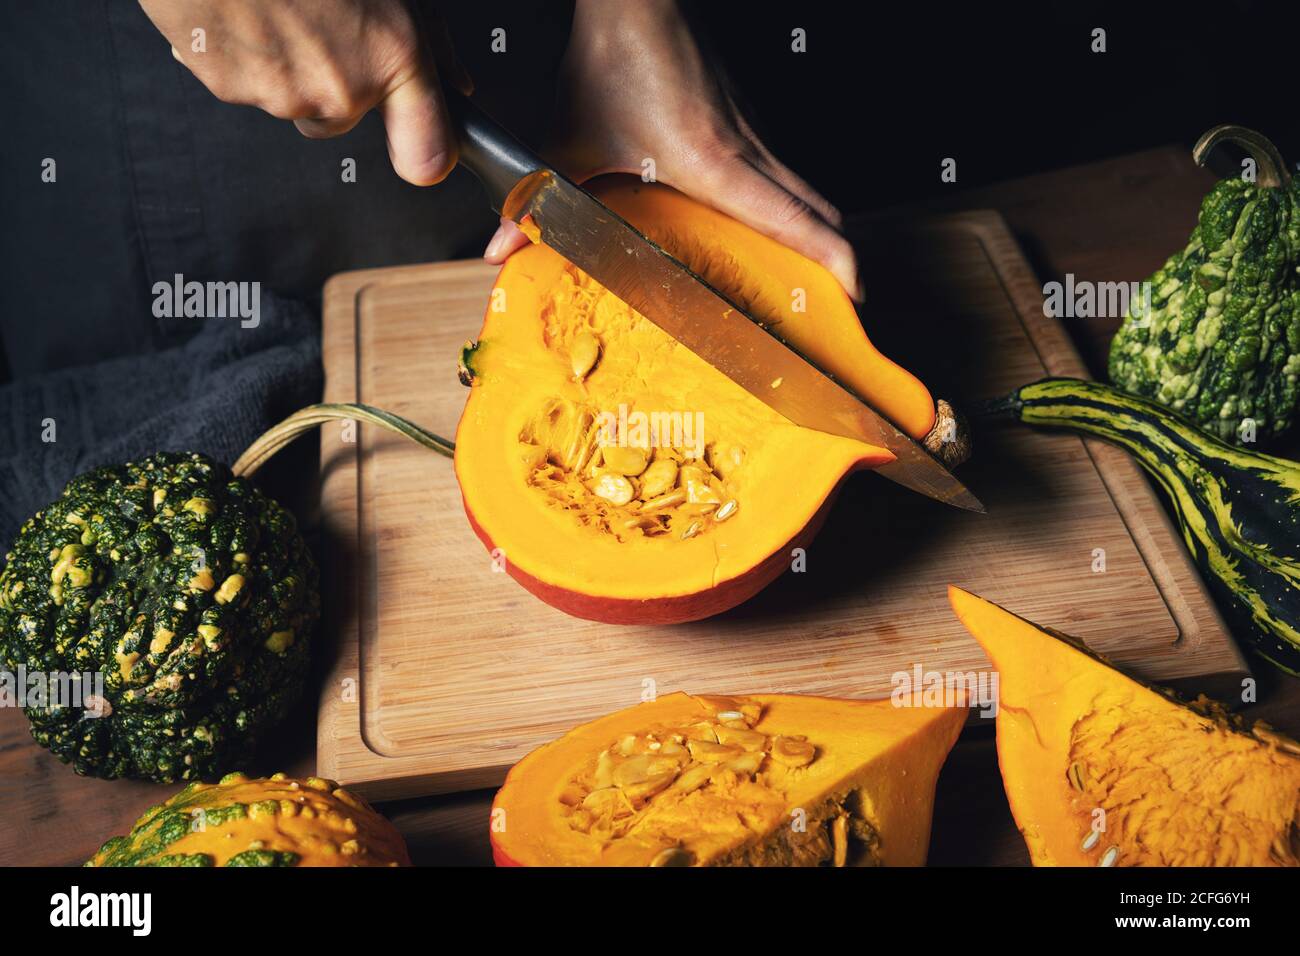 autumn harvest - woman cutting pumpkin for cooking on wooden board Stock Photo